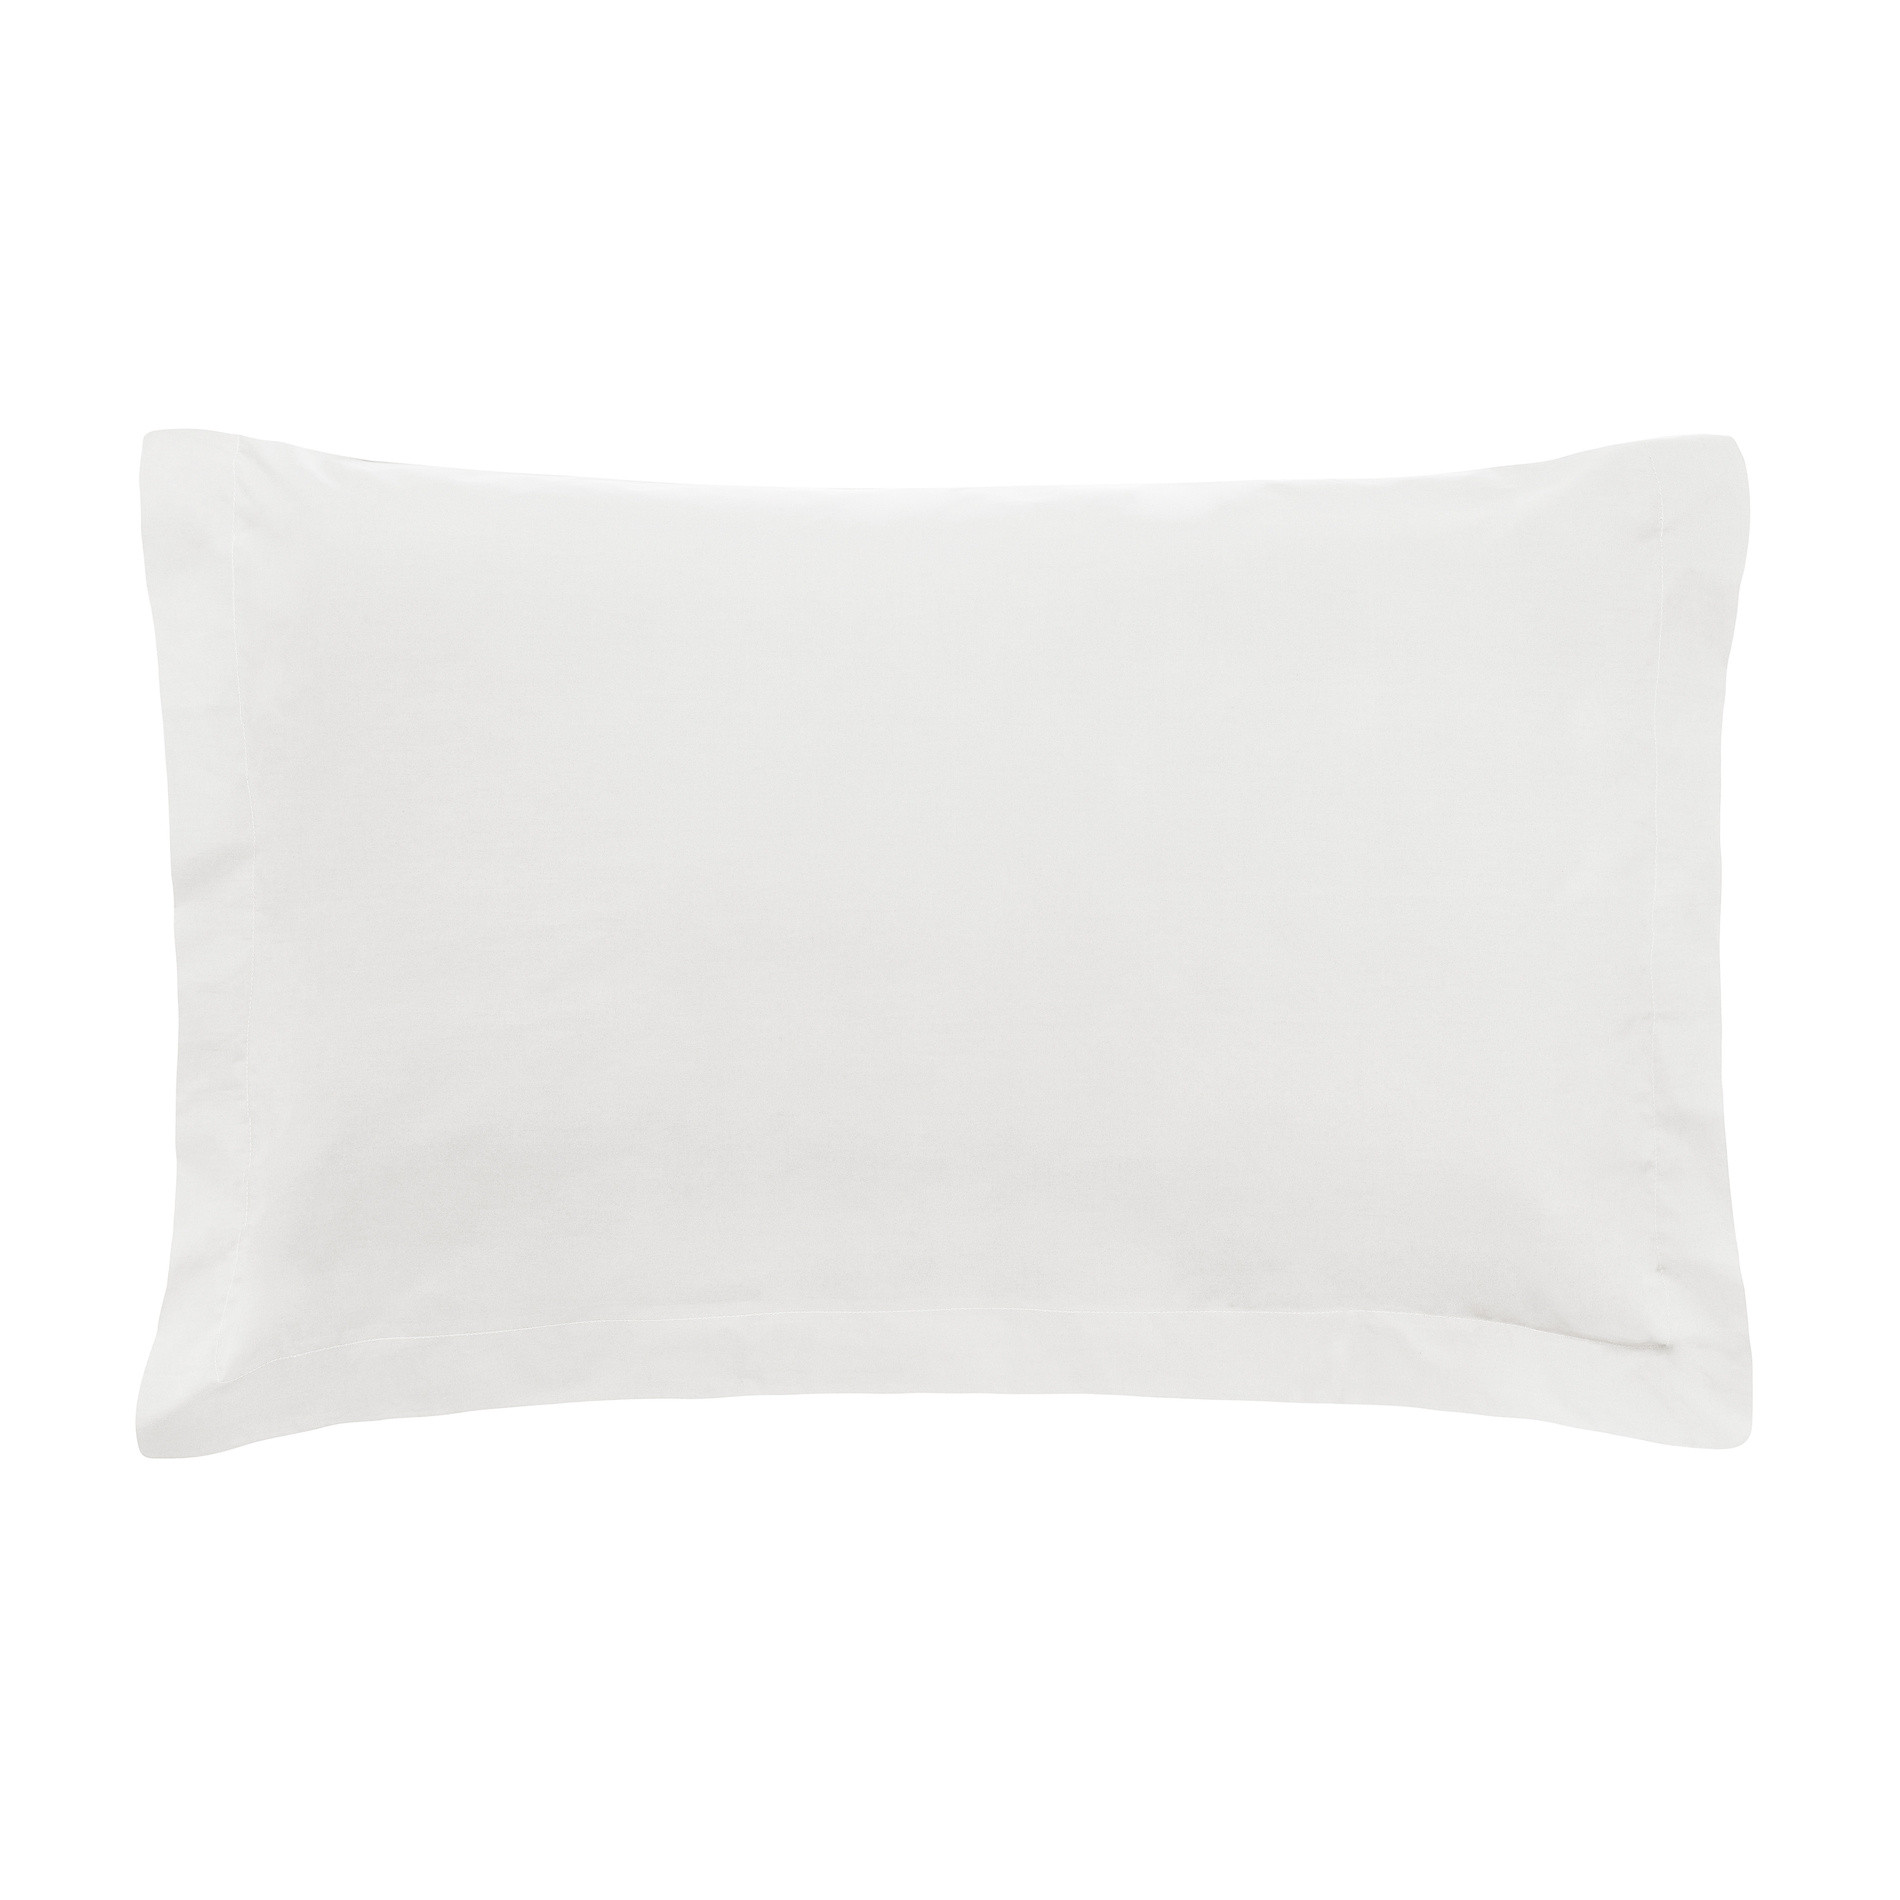 Zefiro solid colour pillowcase in percale., , large image number 0